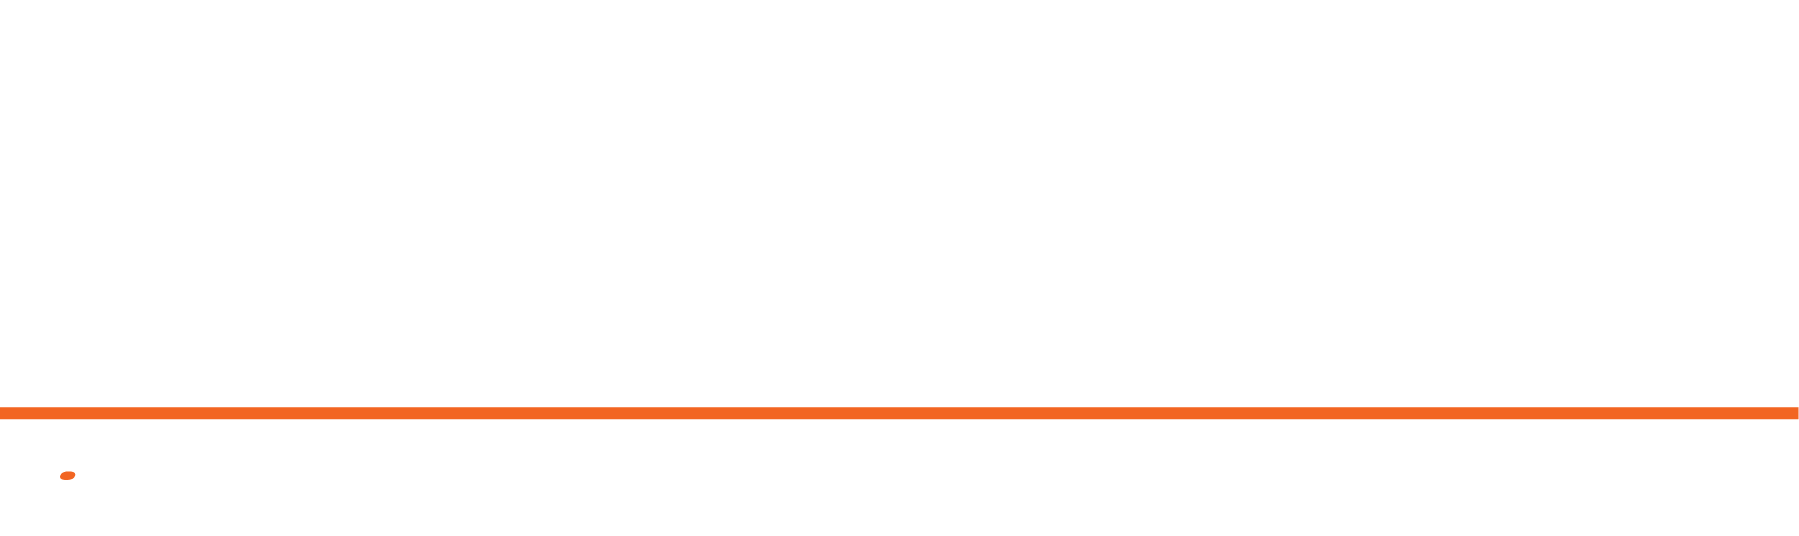 Business Solutions Image